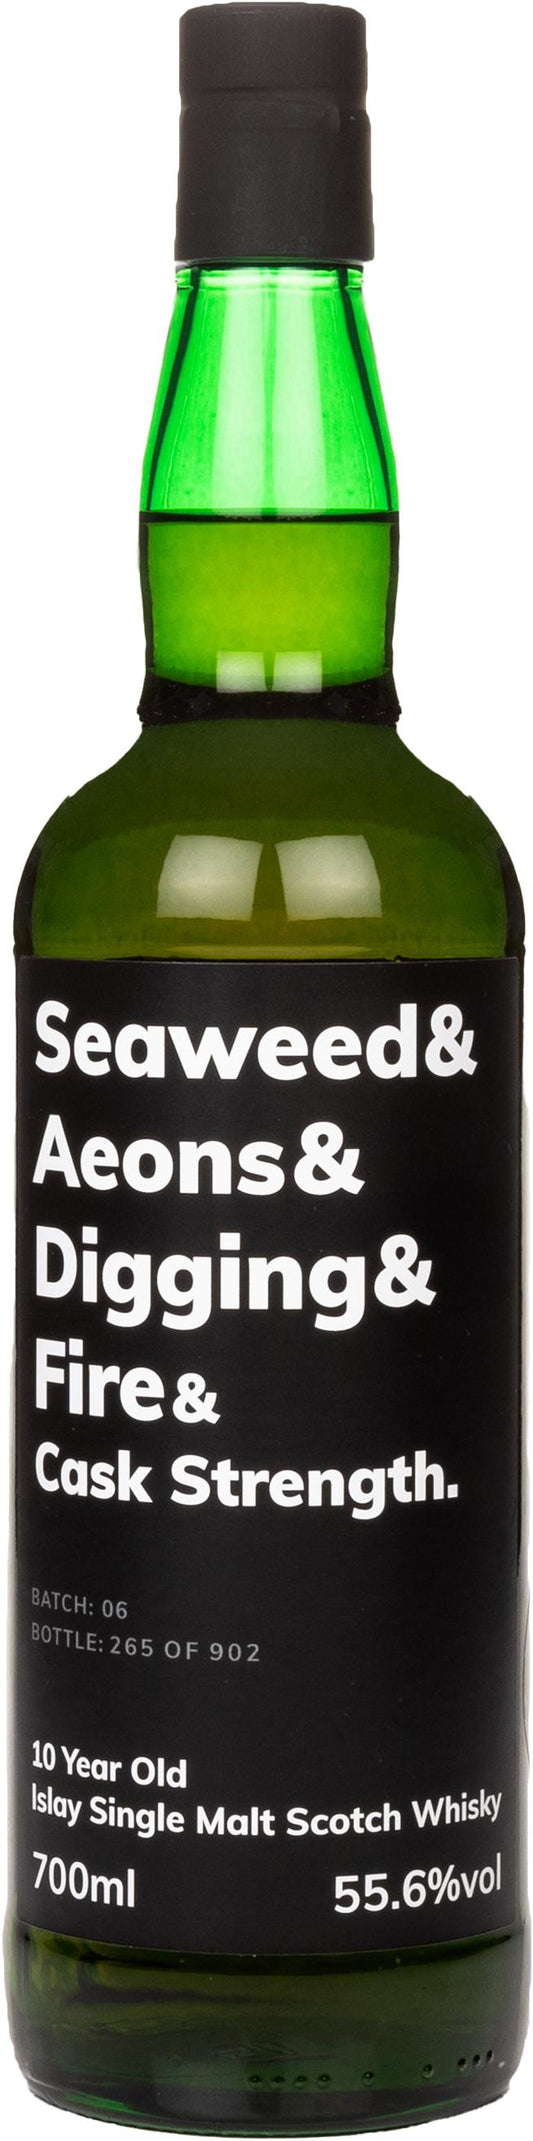 Seaweed & Aeons & Digging & Fire & Cask Strength 10 Year Old Single Malt Scotch Whisky 700ml